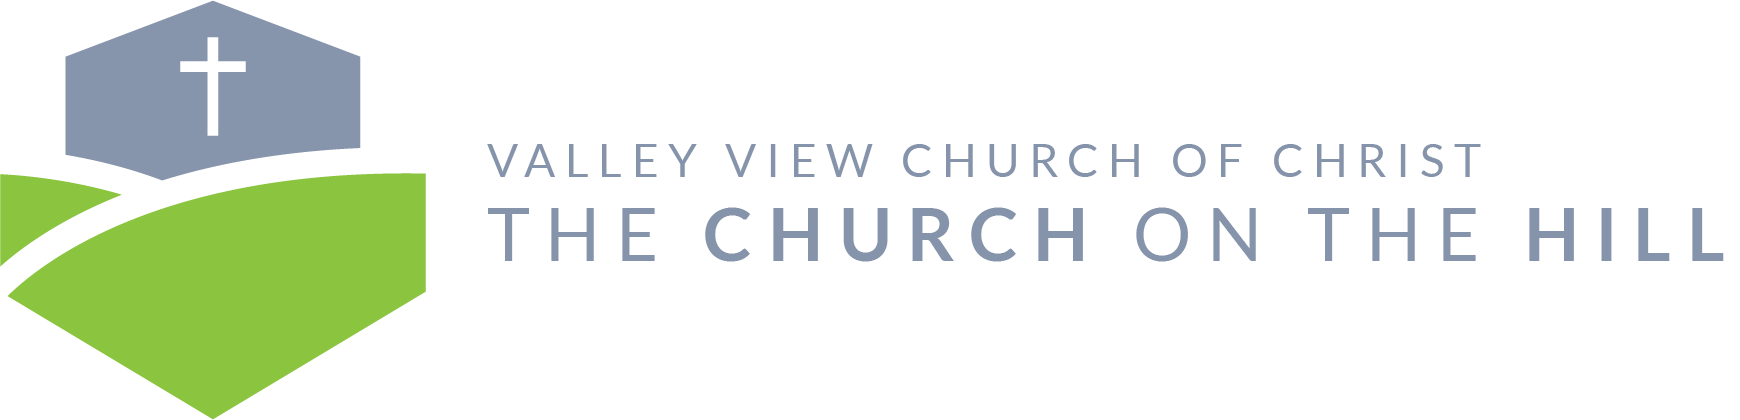 Valley View Church of Christ